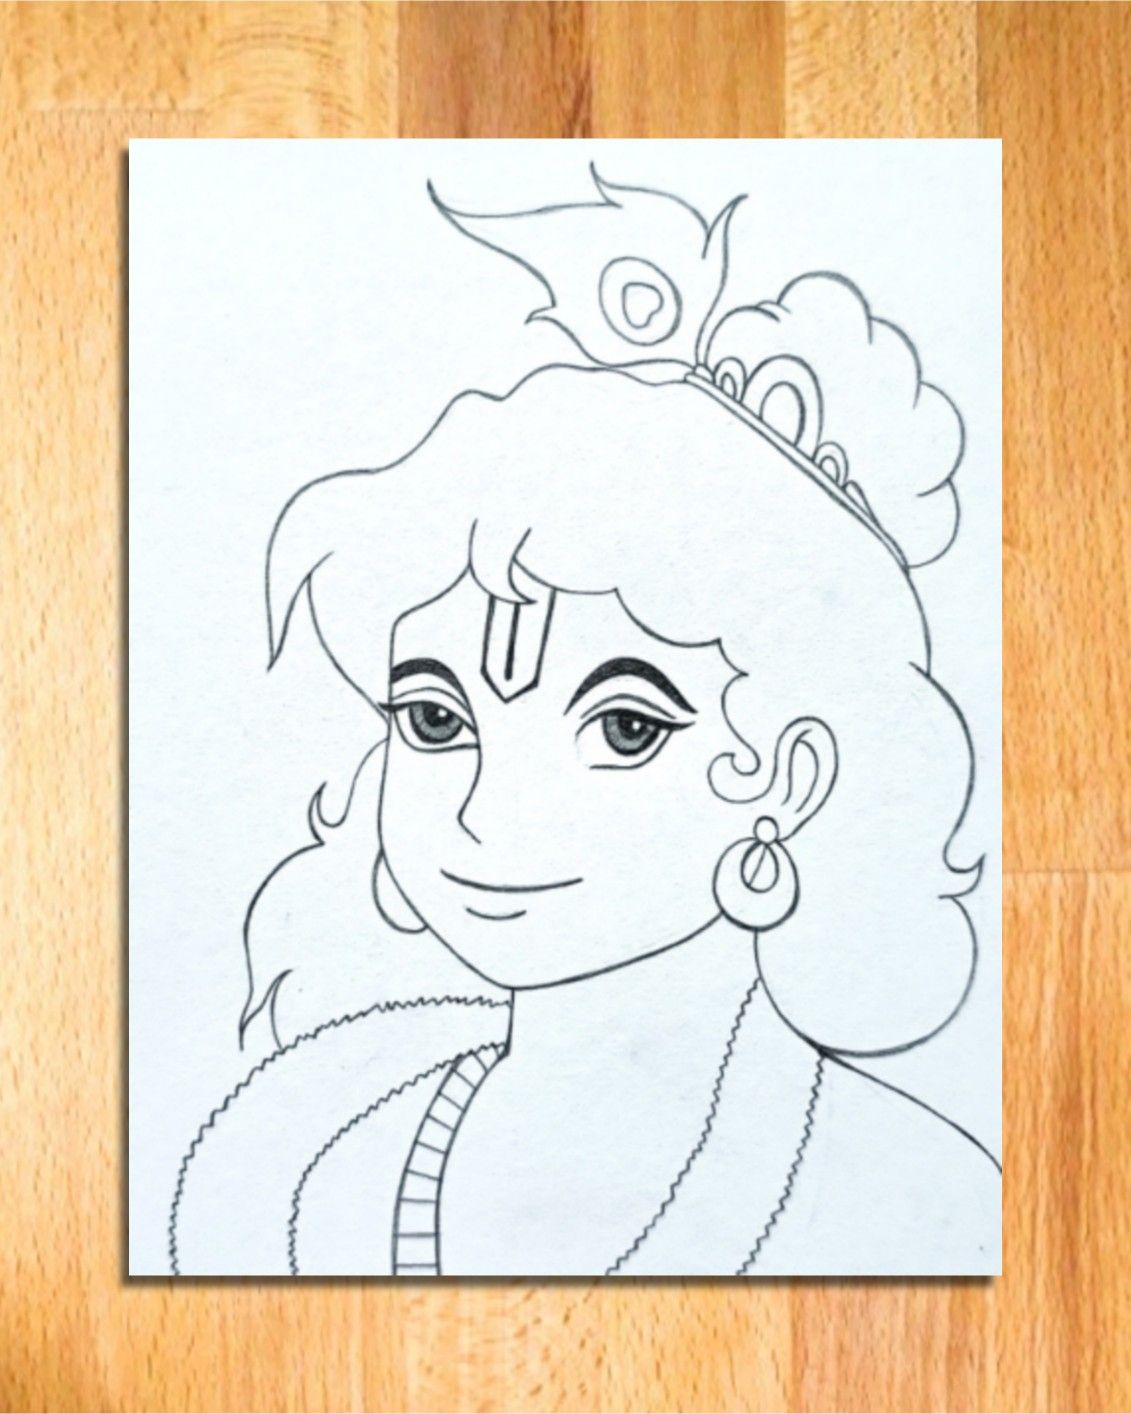 How To Draw God Krishna  StepByStep Guide with Images